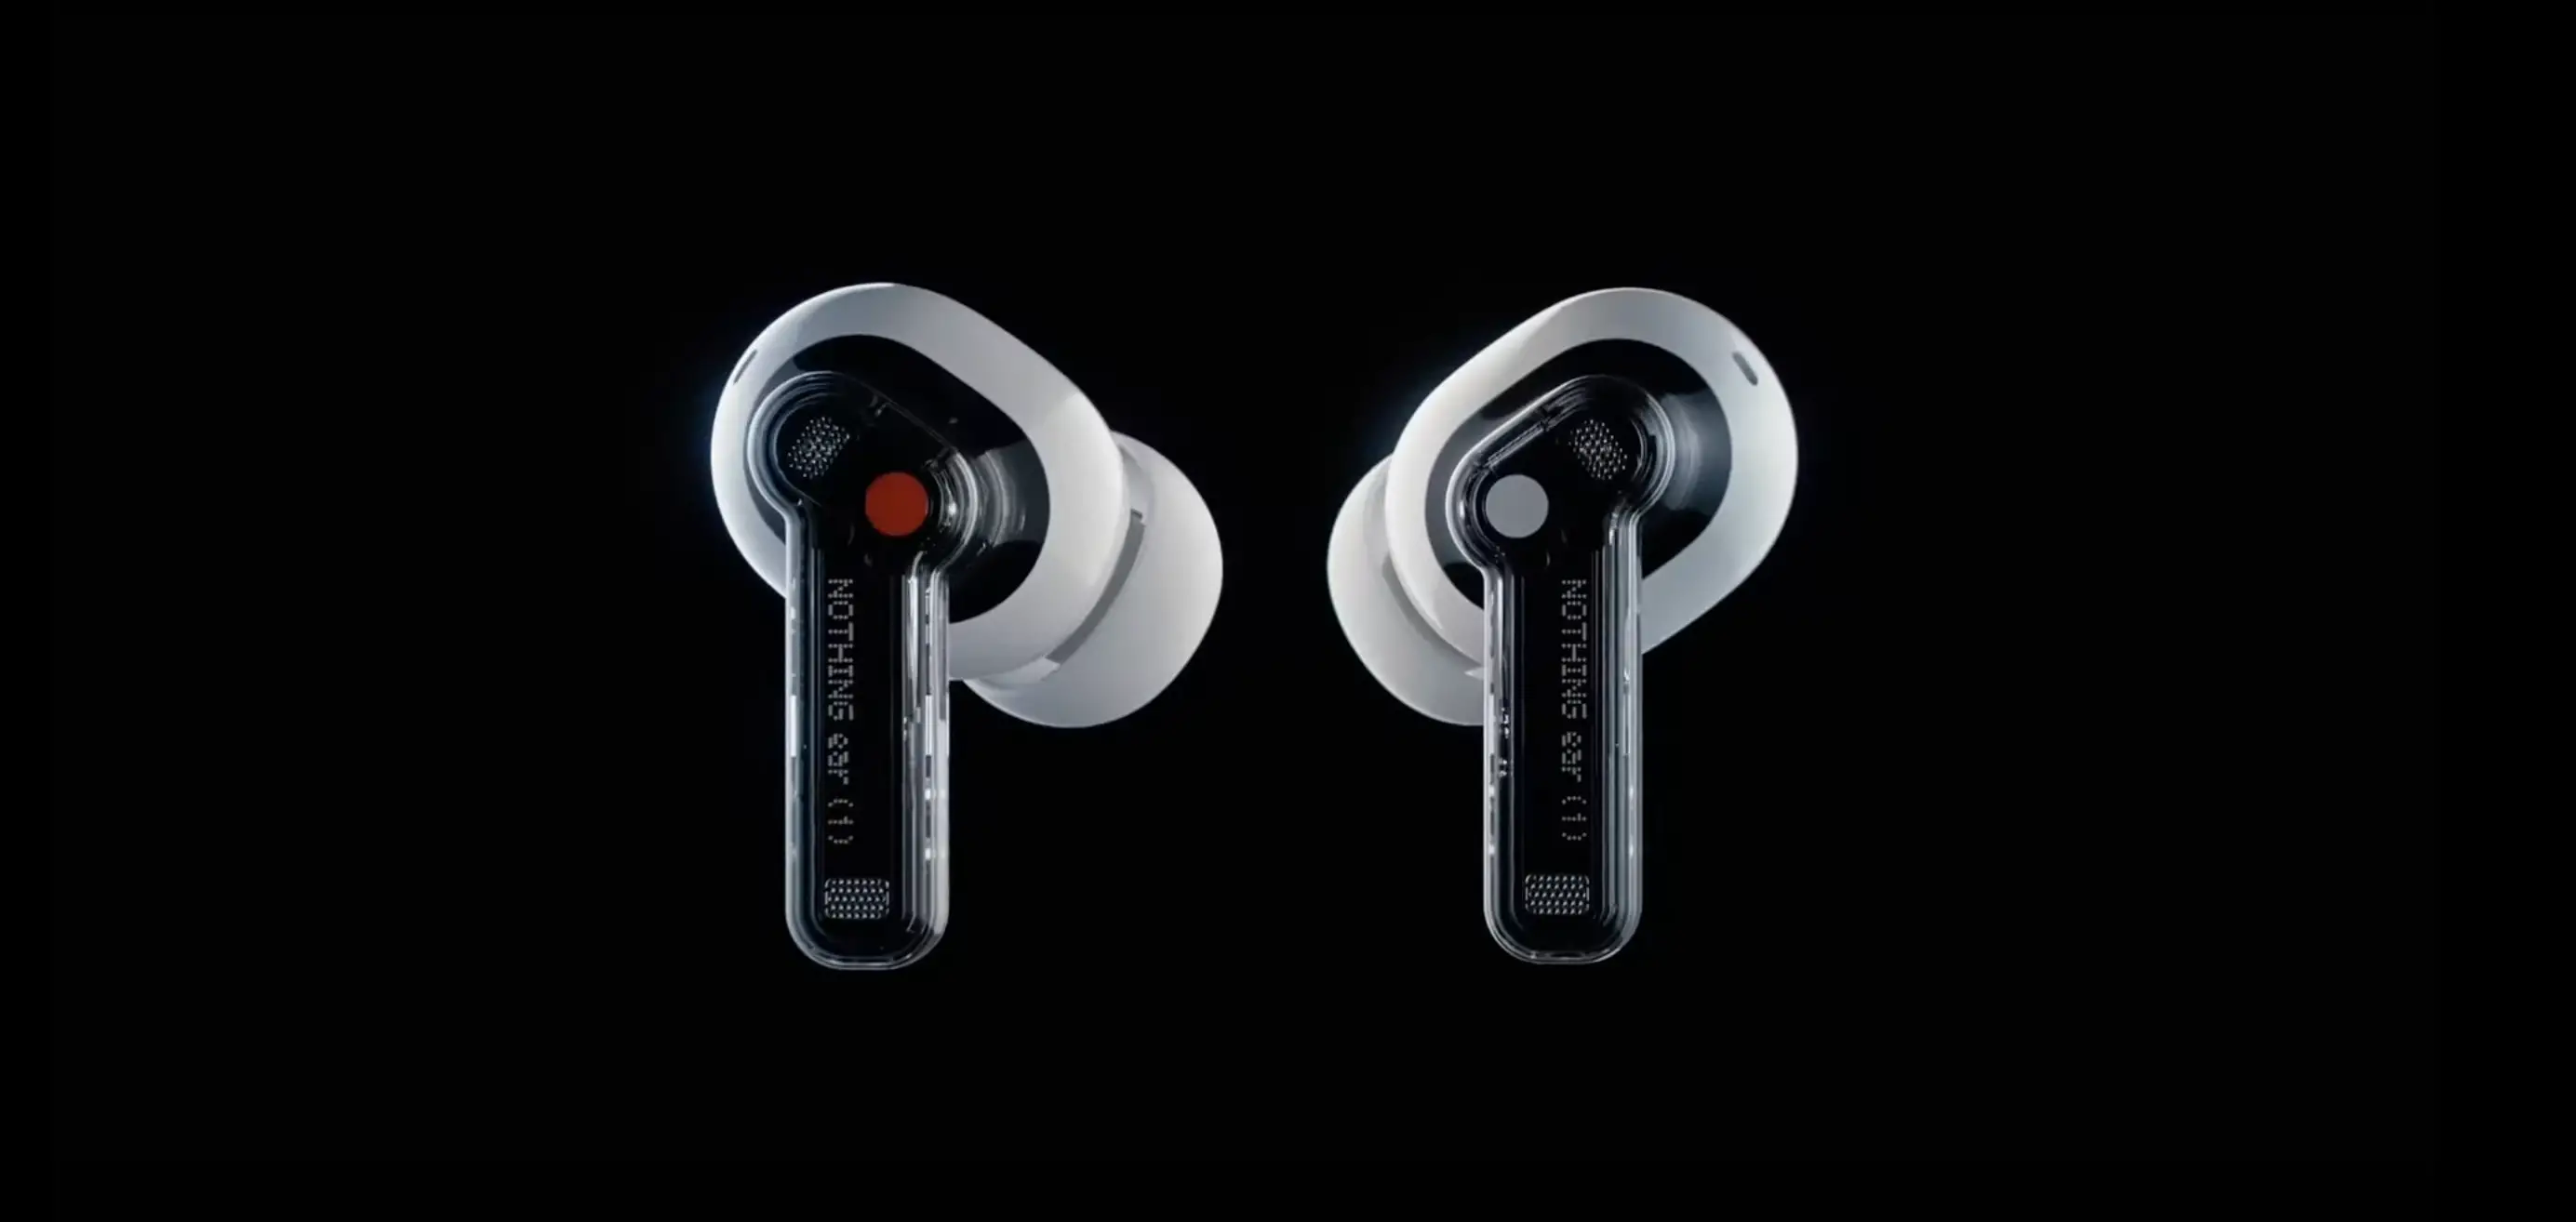 Nothing Ear 1 Black Edition Earbuds